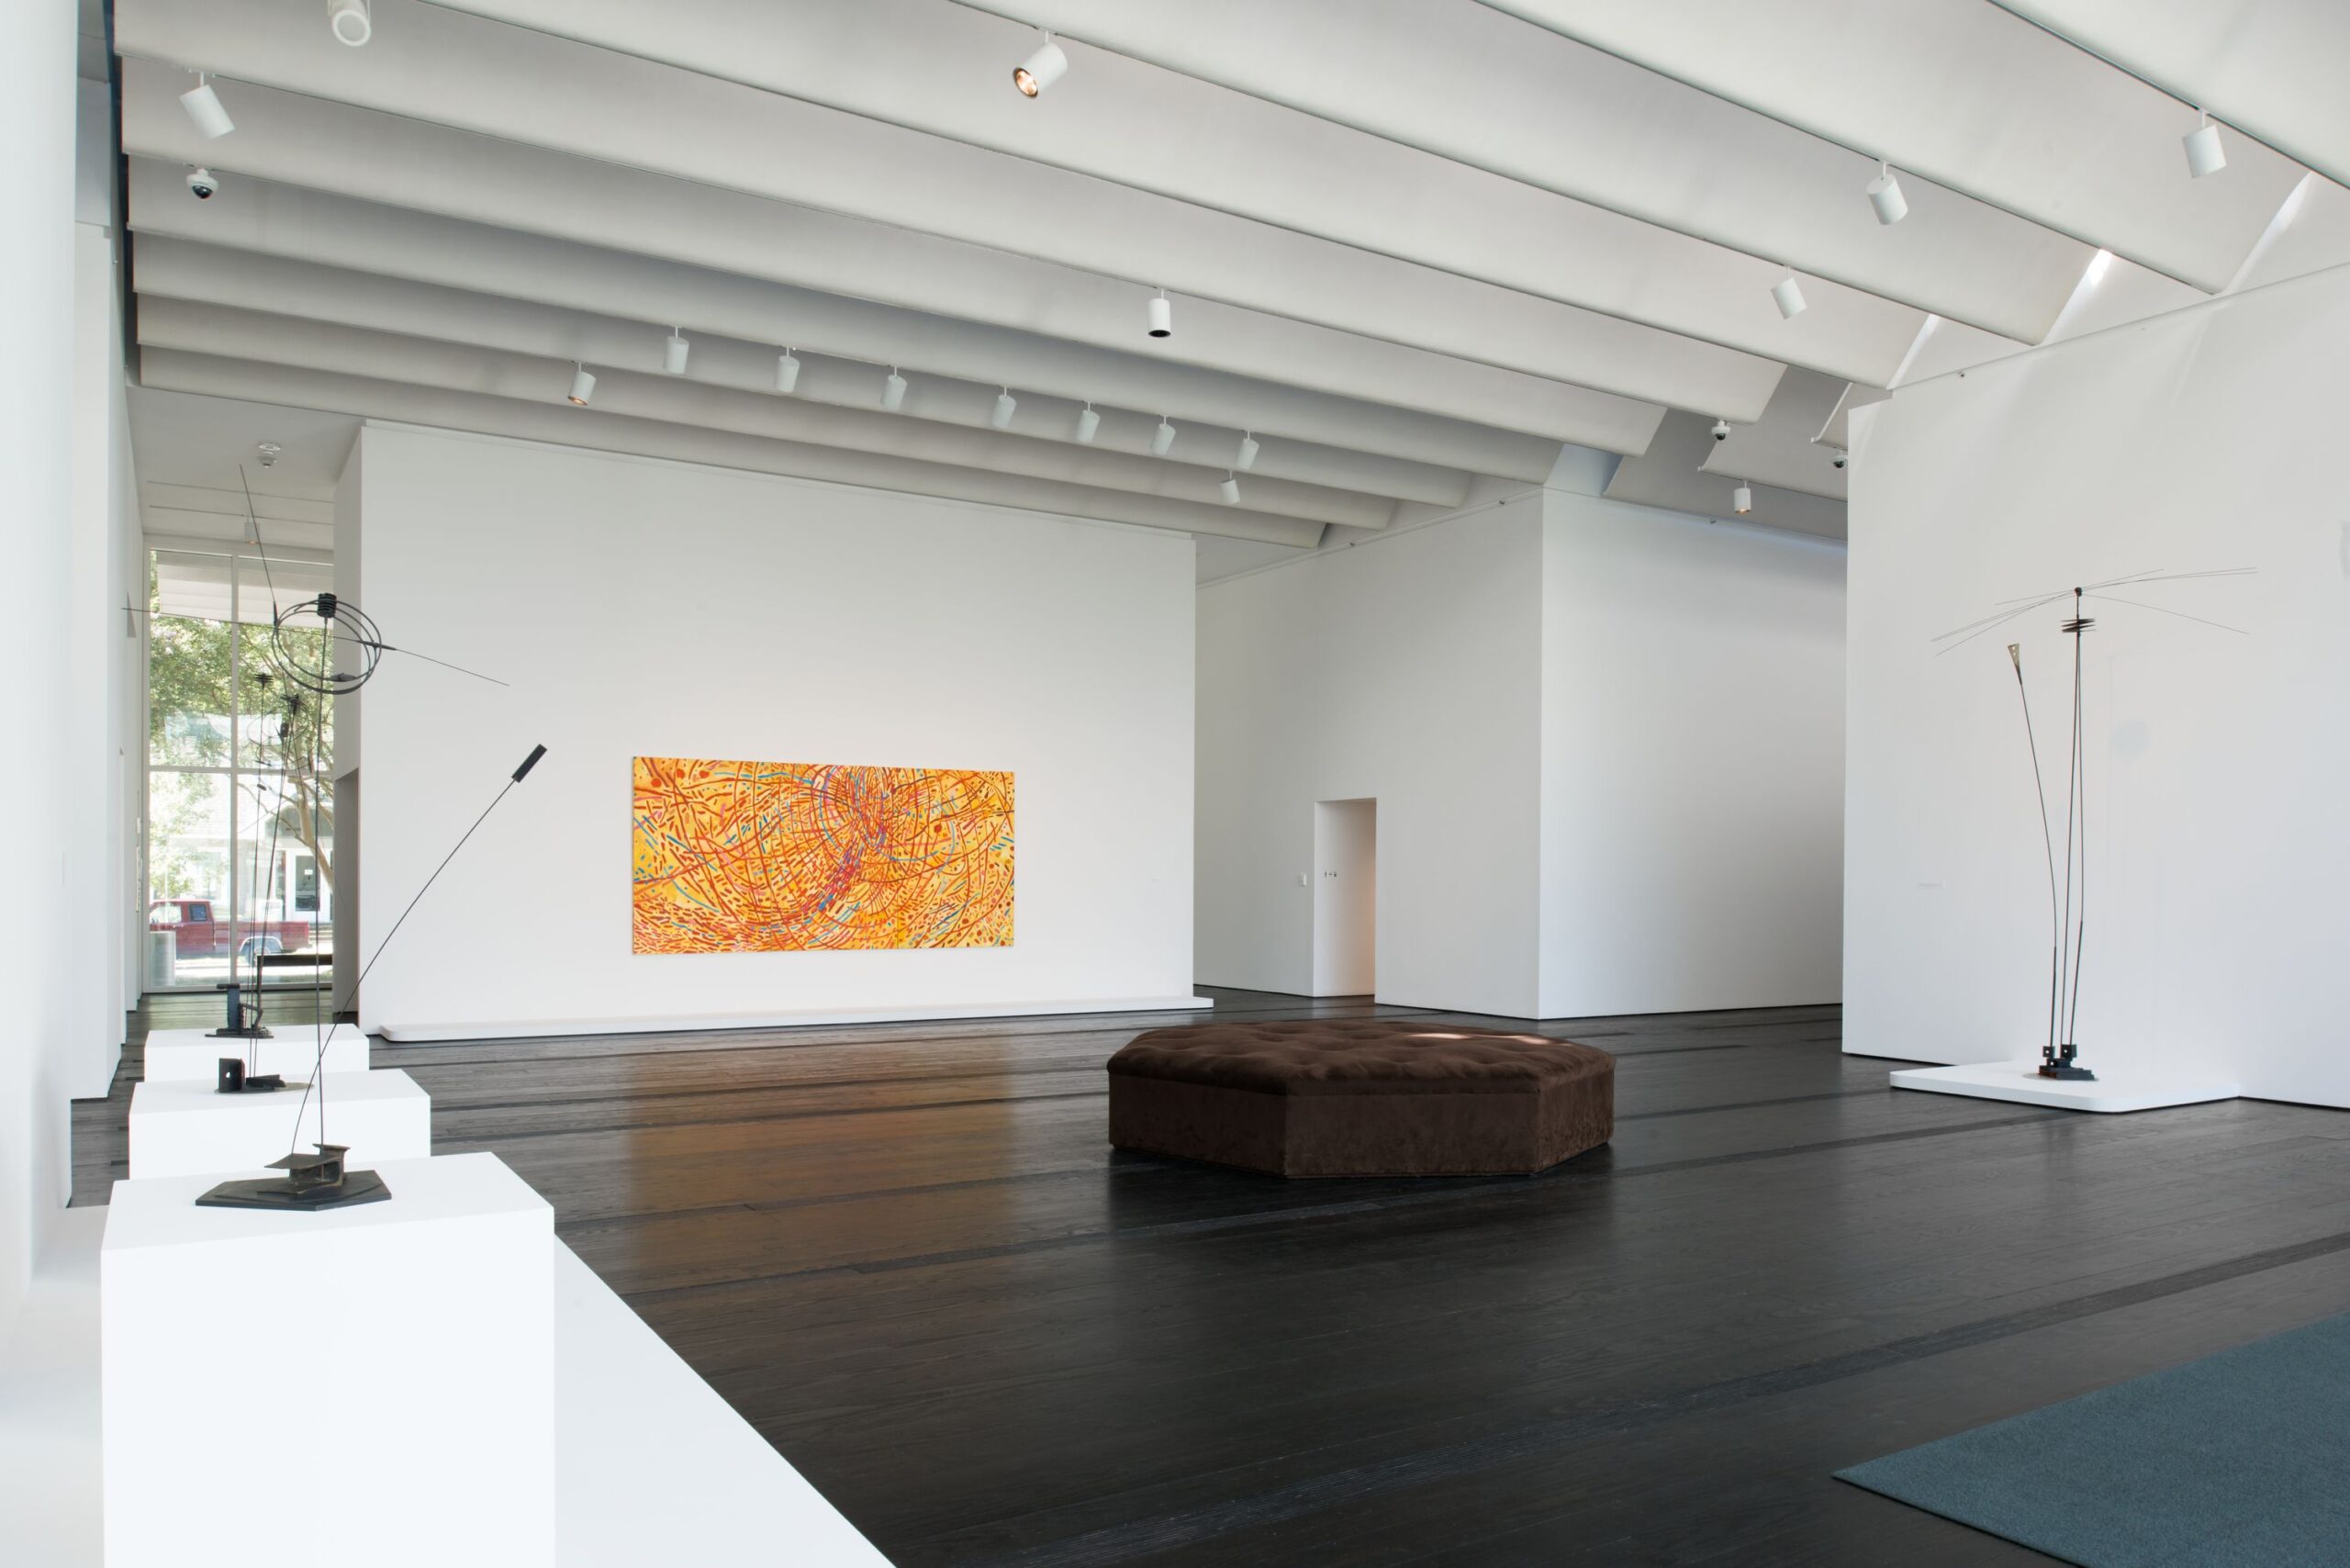 Image of a gallery space with white walls and black flooring featuring a yellow, red, and blue rectangular painting and several tall, dark wire sculptures.